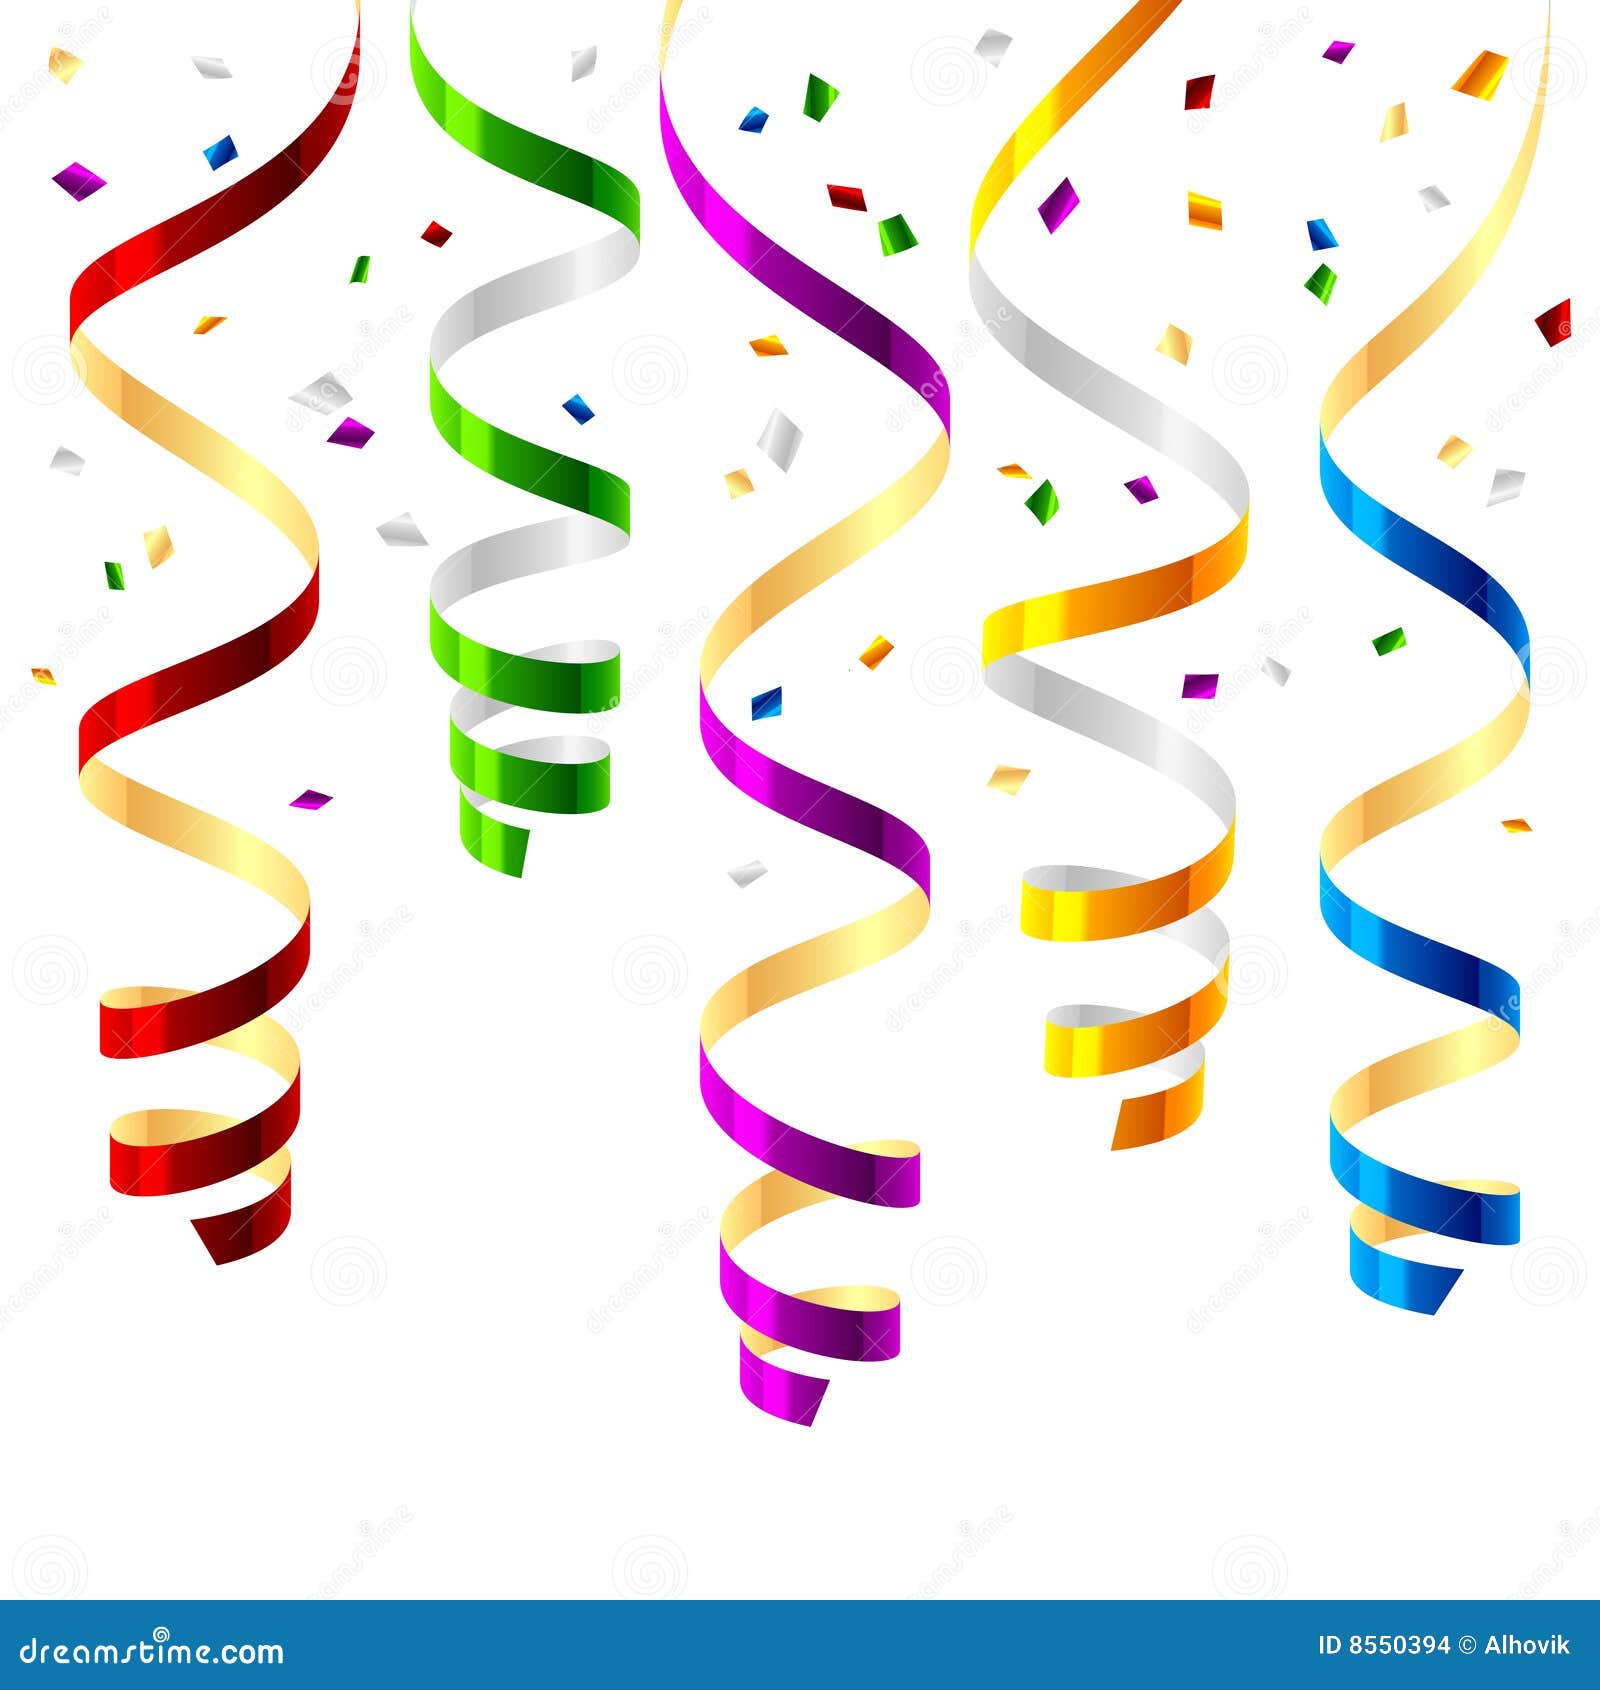 clipart balloons and streamers - photo #12